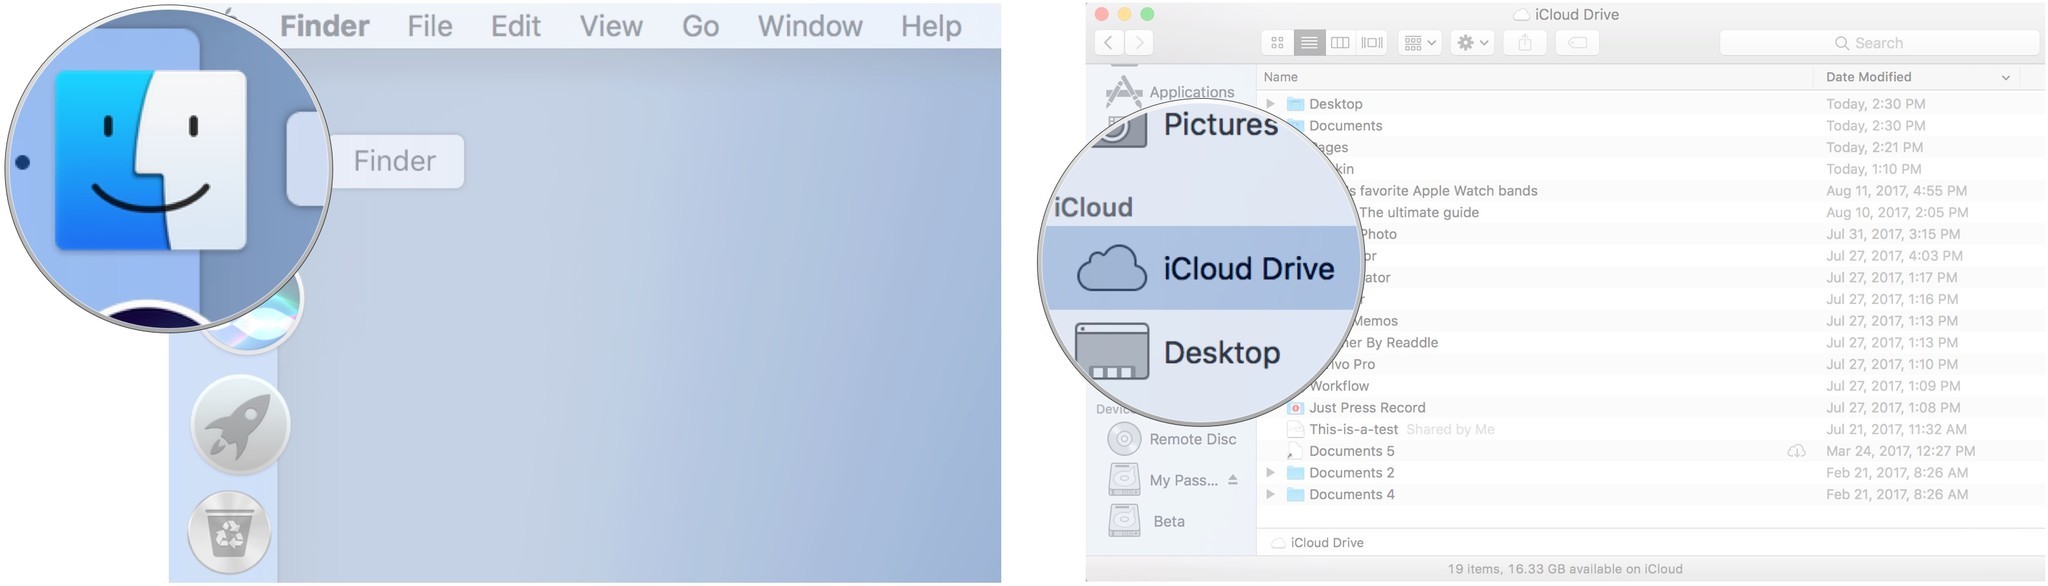 How to access iCloud Drive from Finder on your Mac: Click on Finder, then click on iCloud Drive